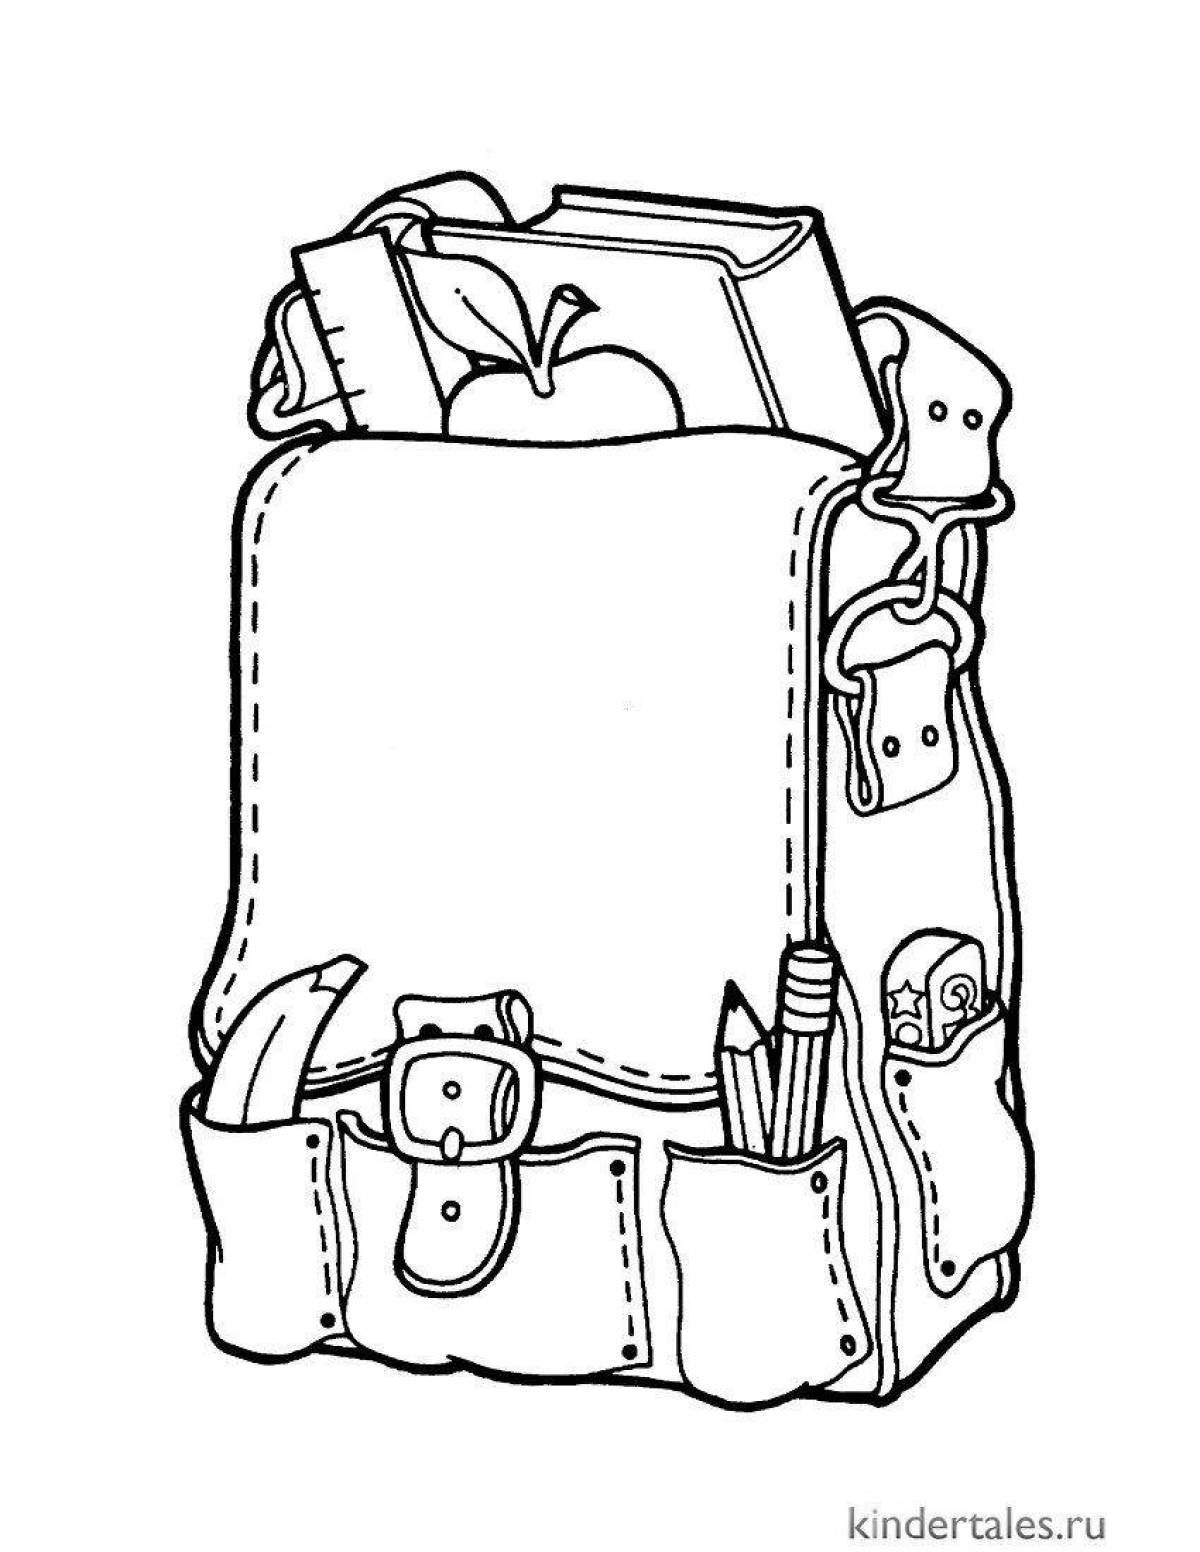 Amazing portfolio coloring page for the little ones